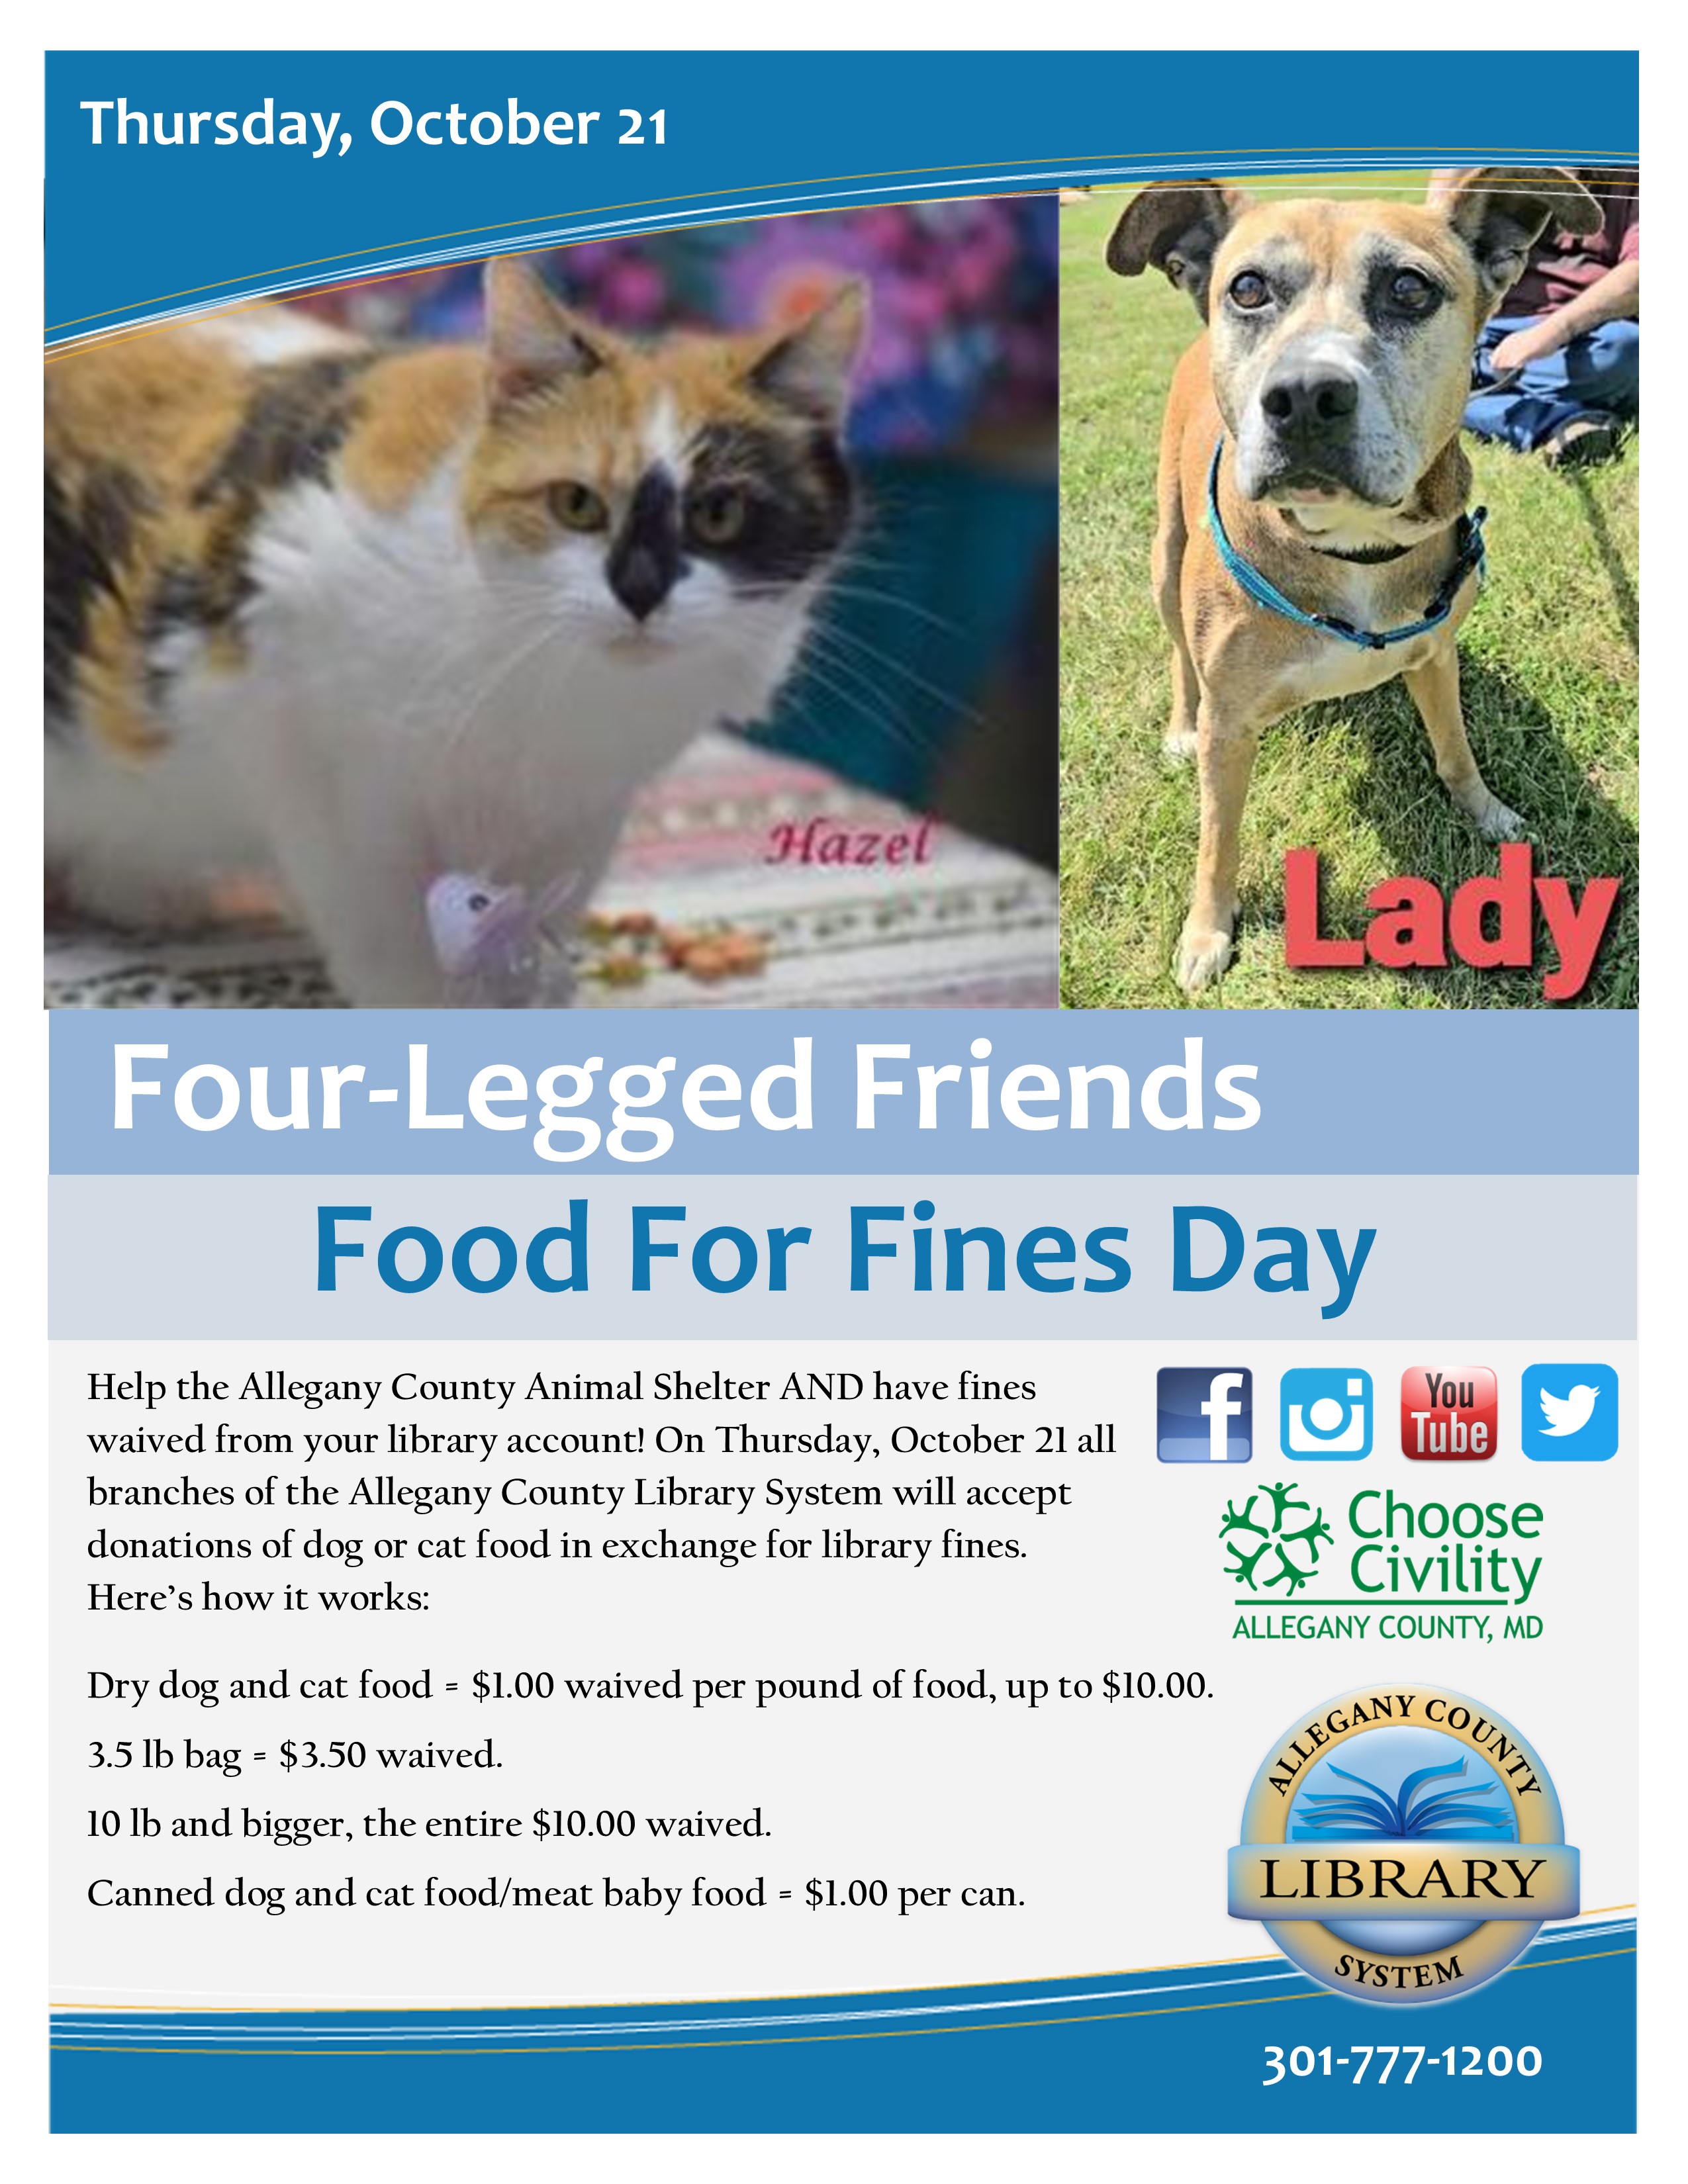 Four-Legged Friends Food for Fines Day flyer